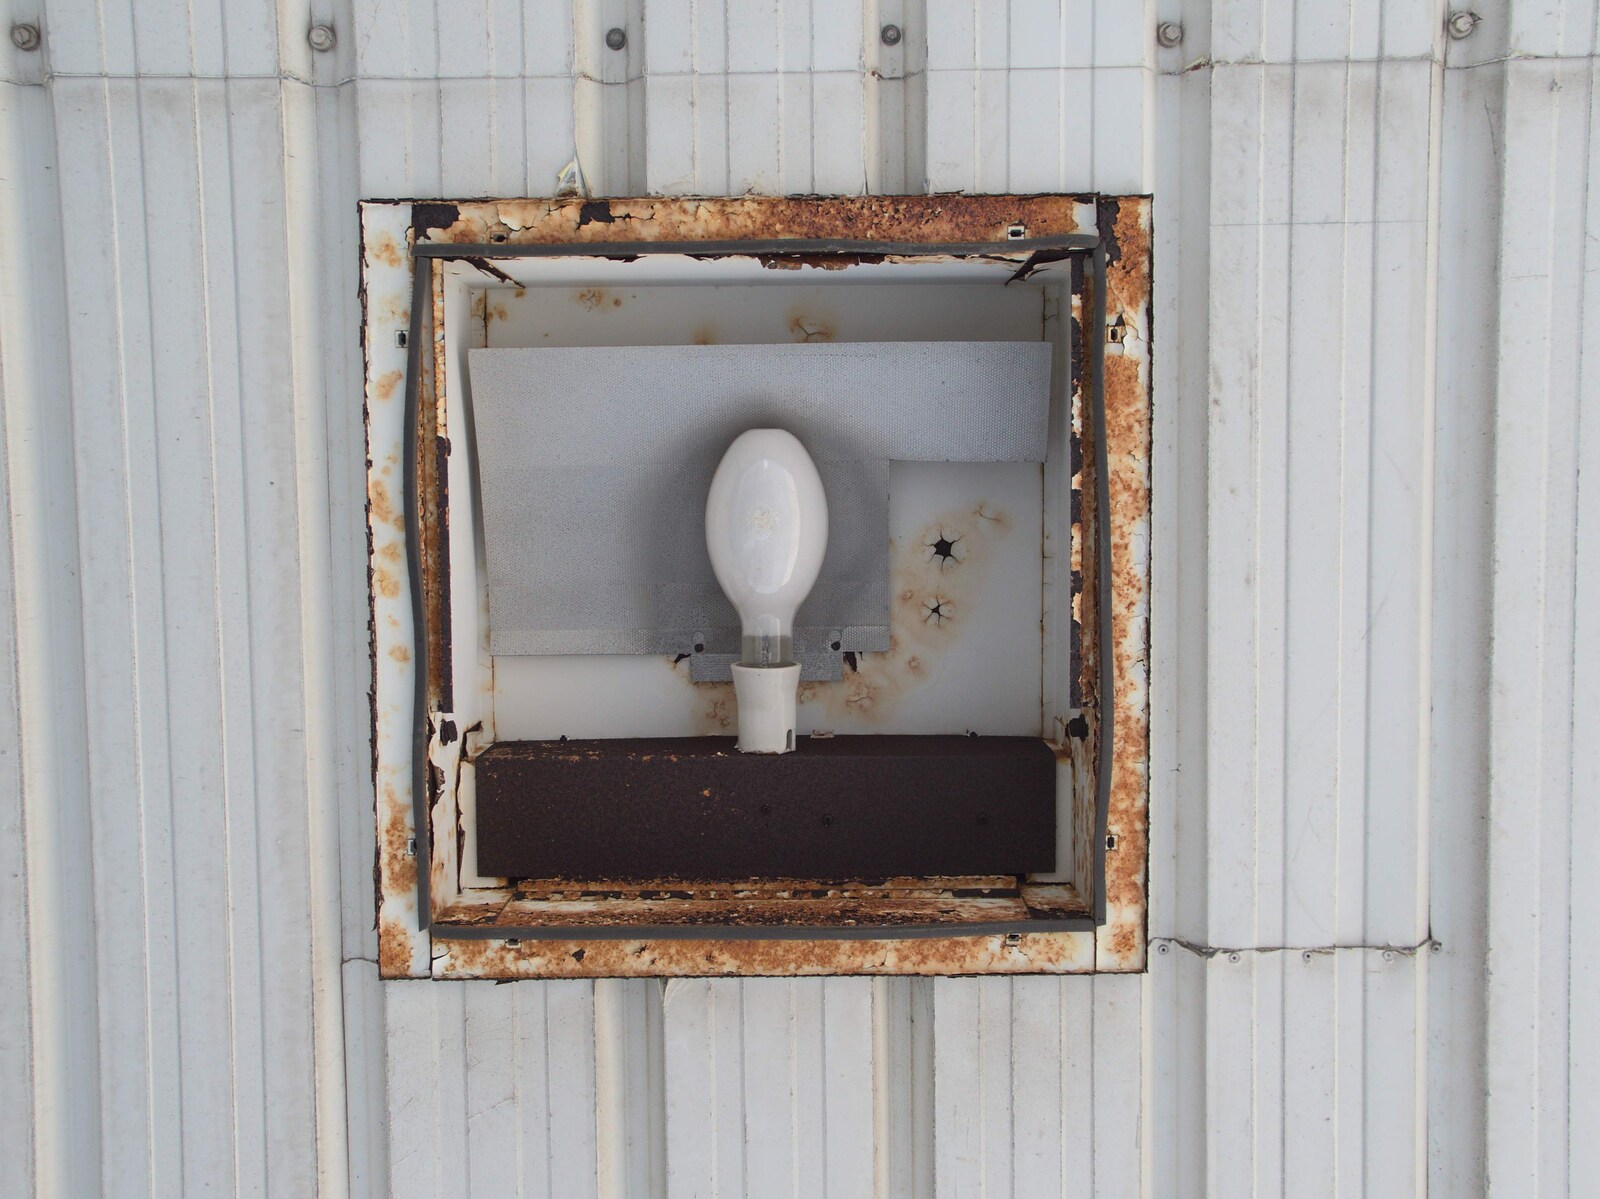 A rusted-out light fitting in the roof from A Derelict Petrol Station, Palgrave, Suffolk - 16th May 2015